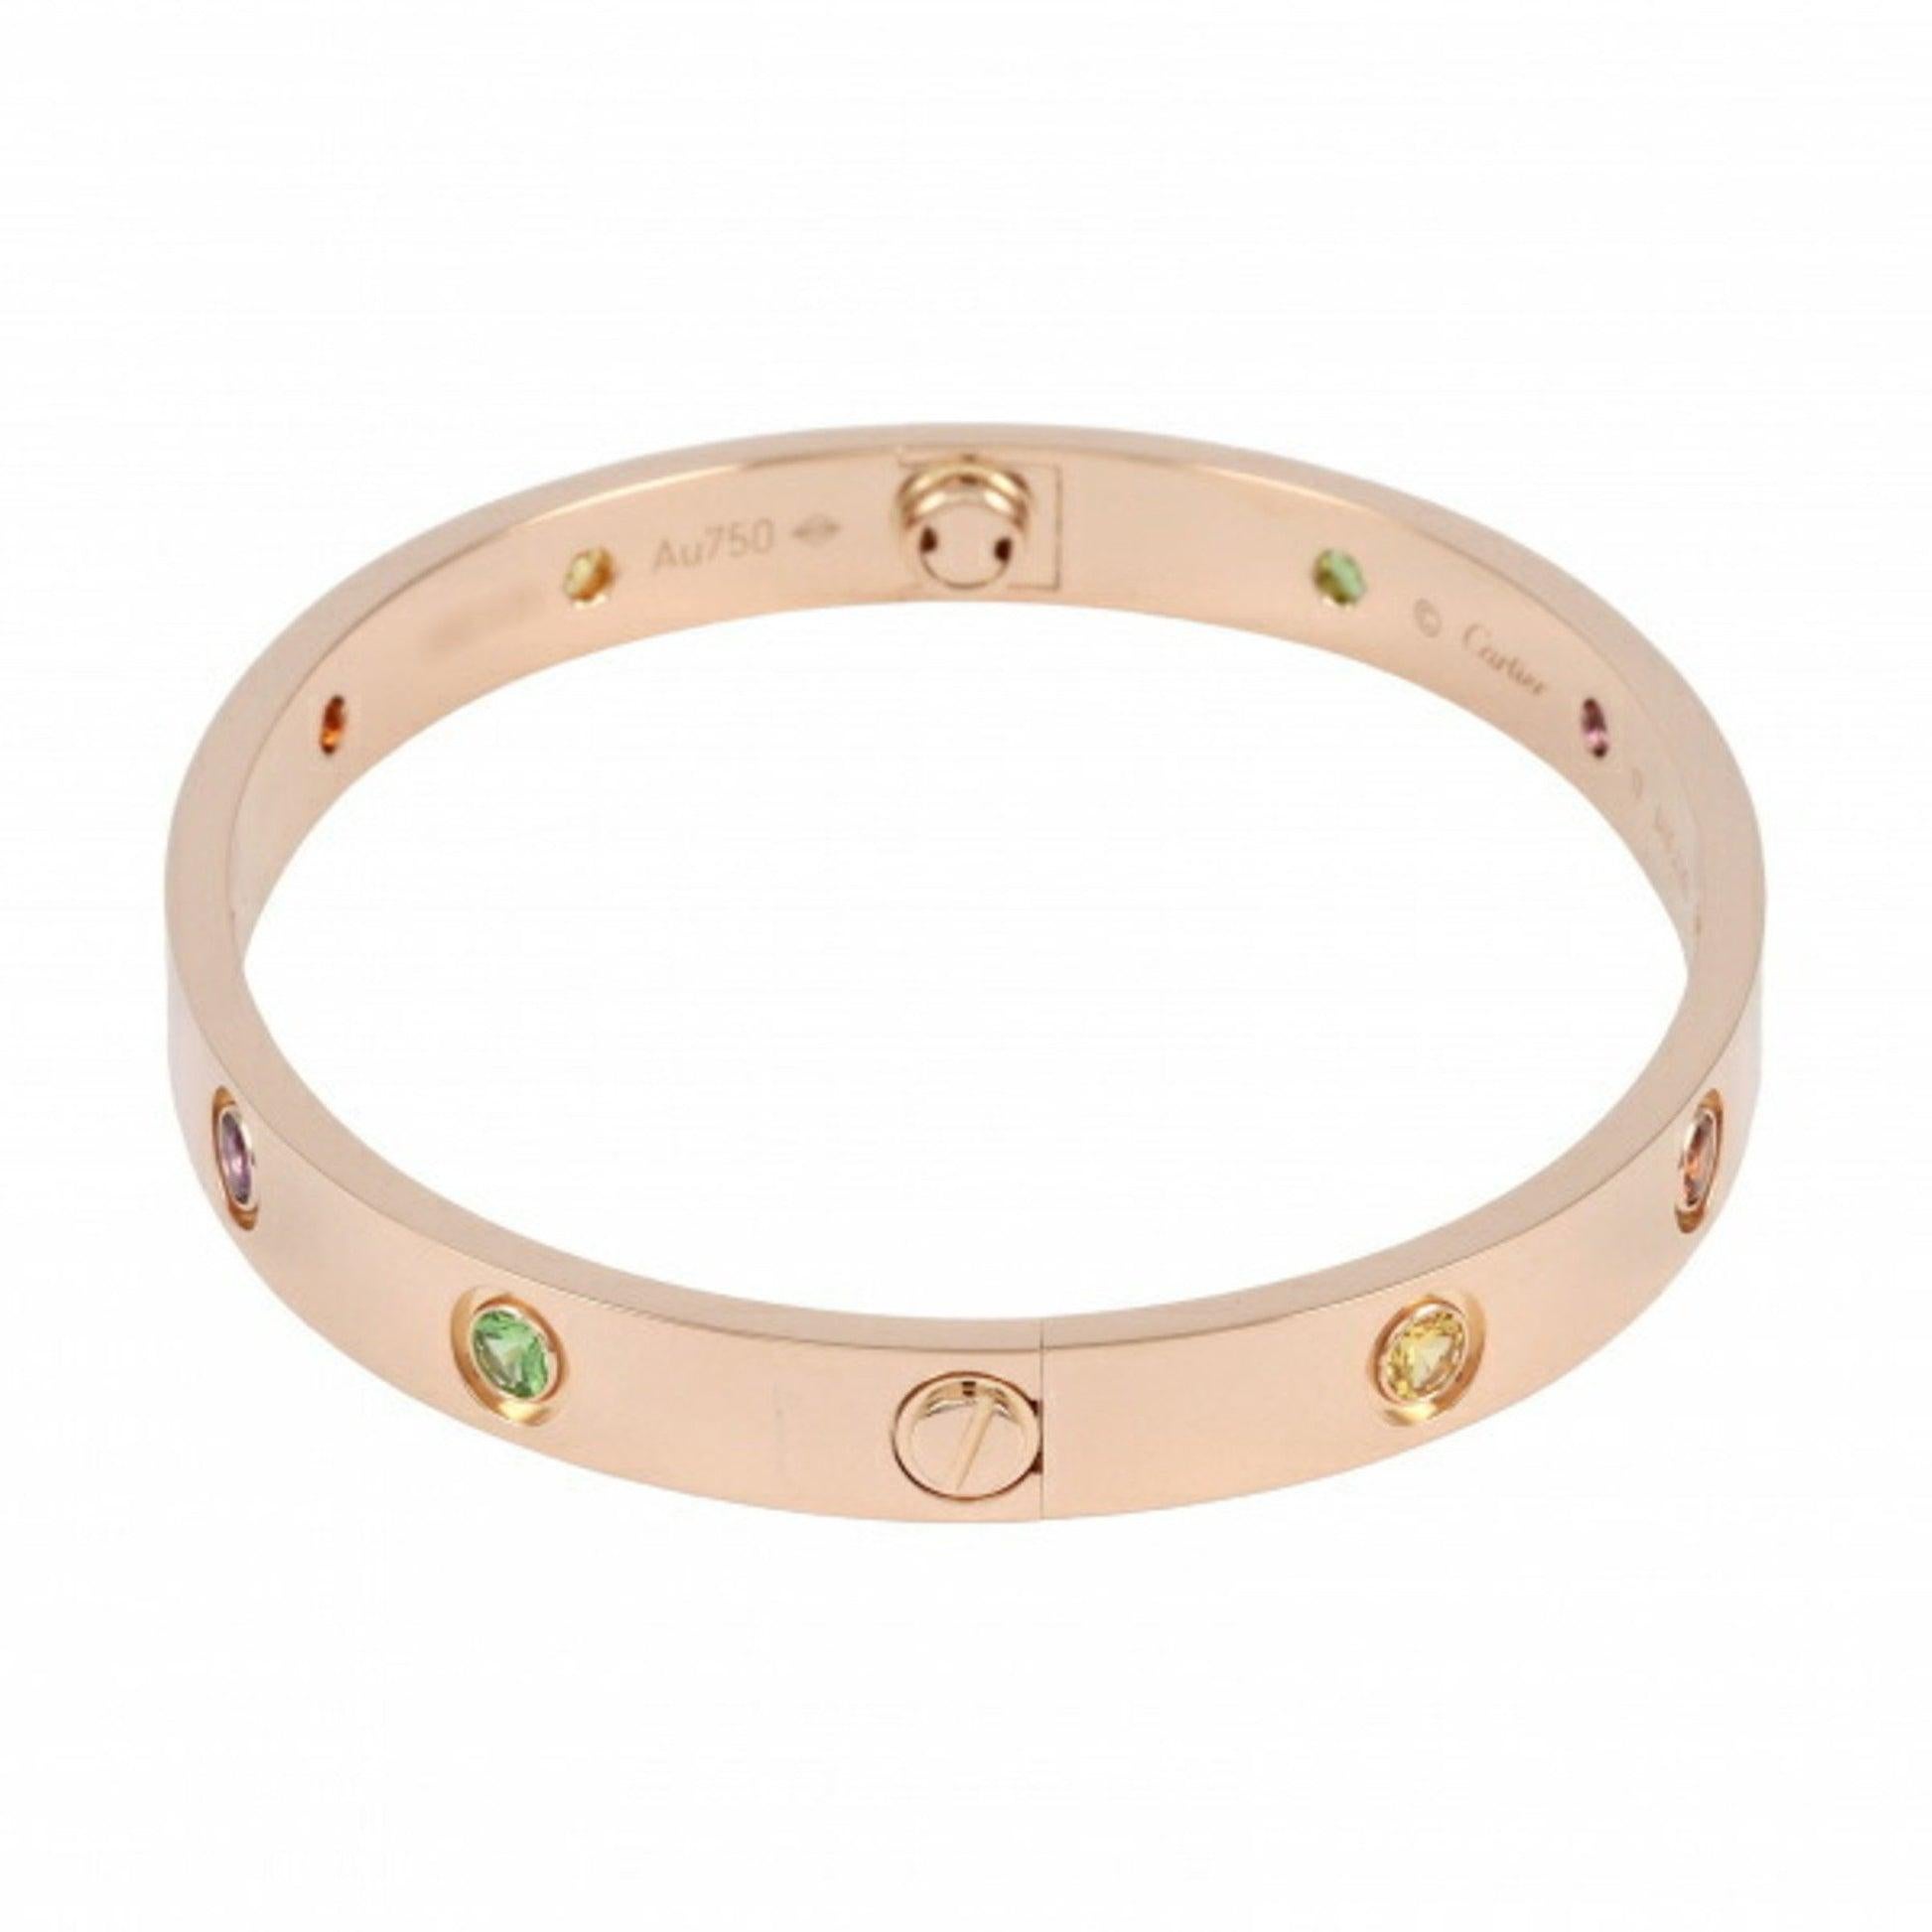 Cartier Love Bracelet in 18K Pink Gold

Additional Information:
Brand: Cartier
Material: Pink gold (18K)
Condition: Good
Condition details: The item has been used and has some minor flaws. Before purchasing, please refer to the images for the exact